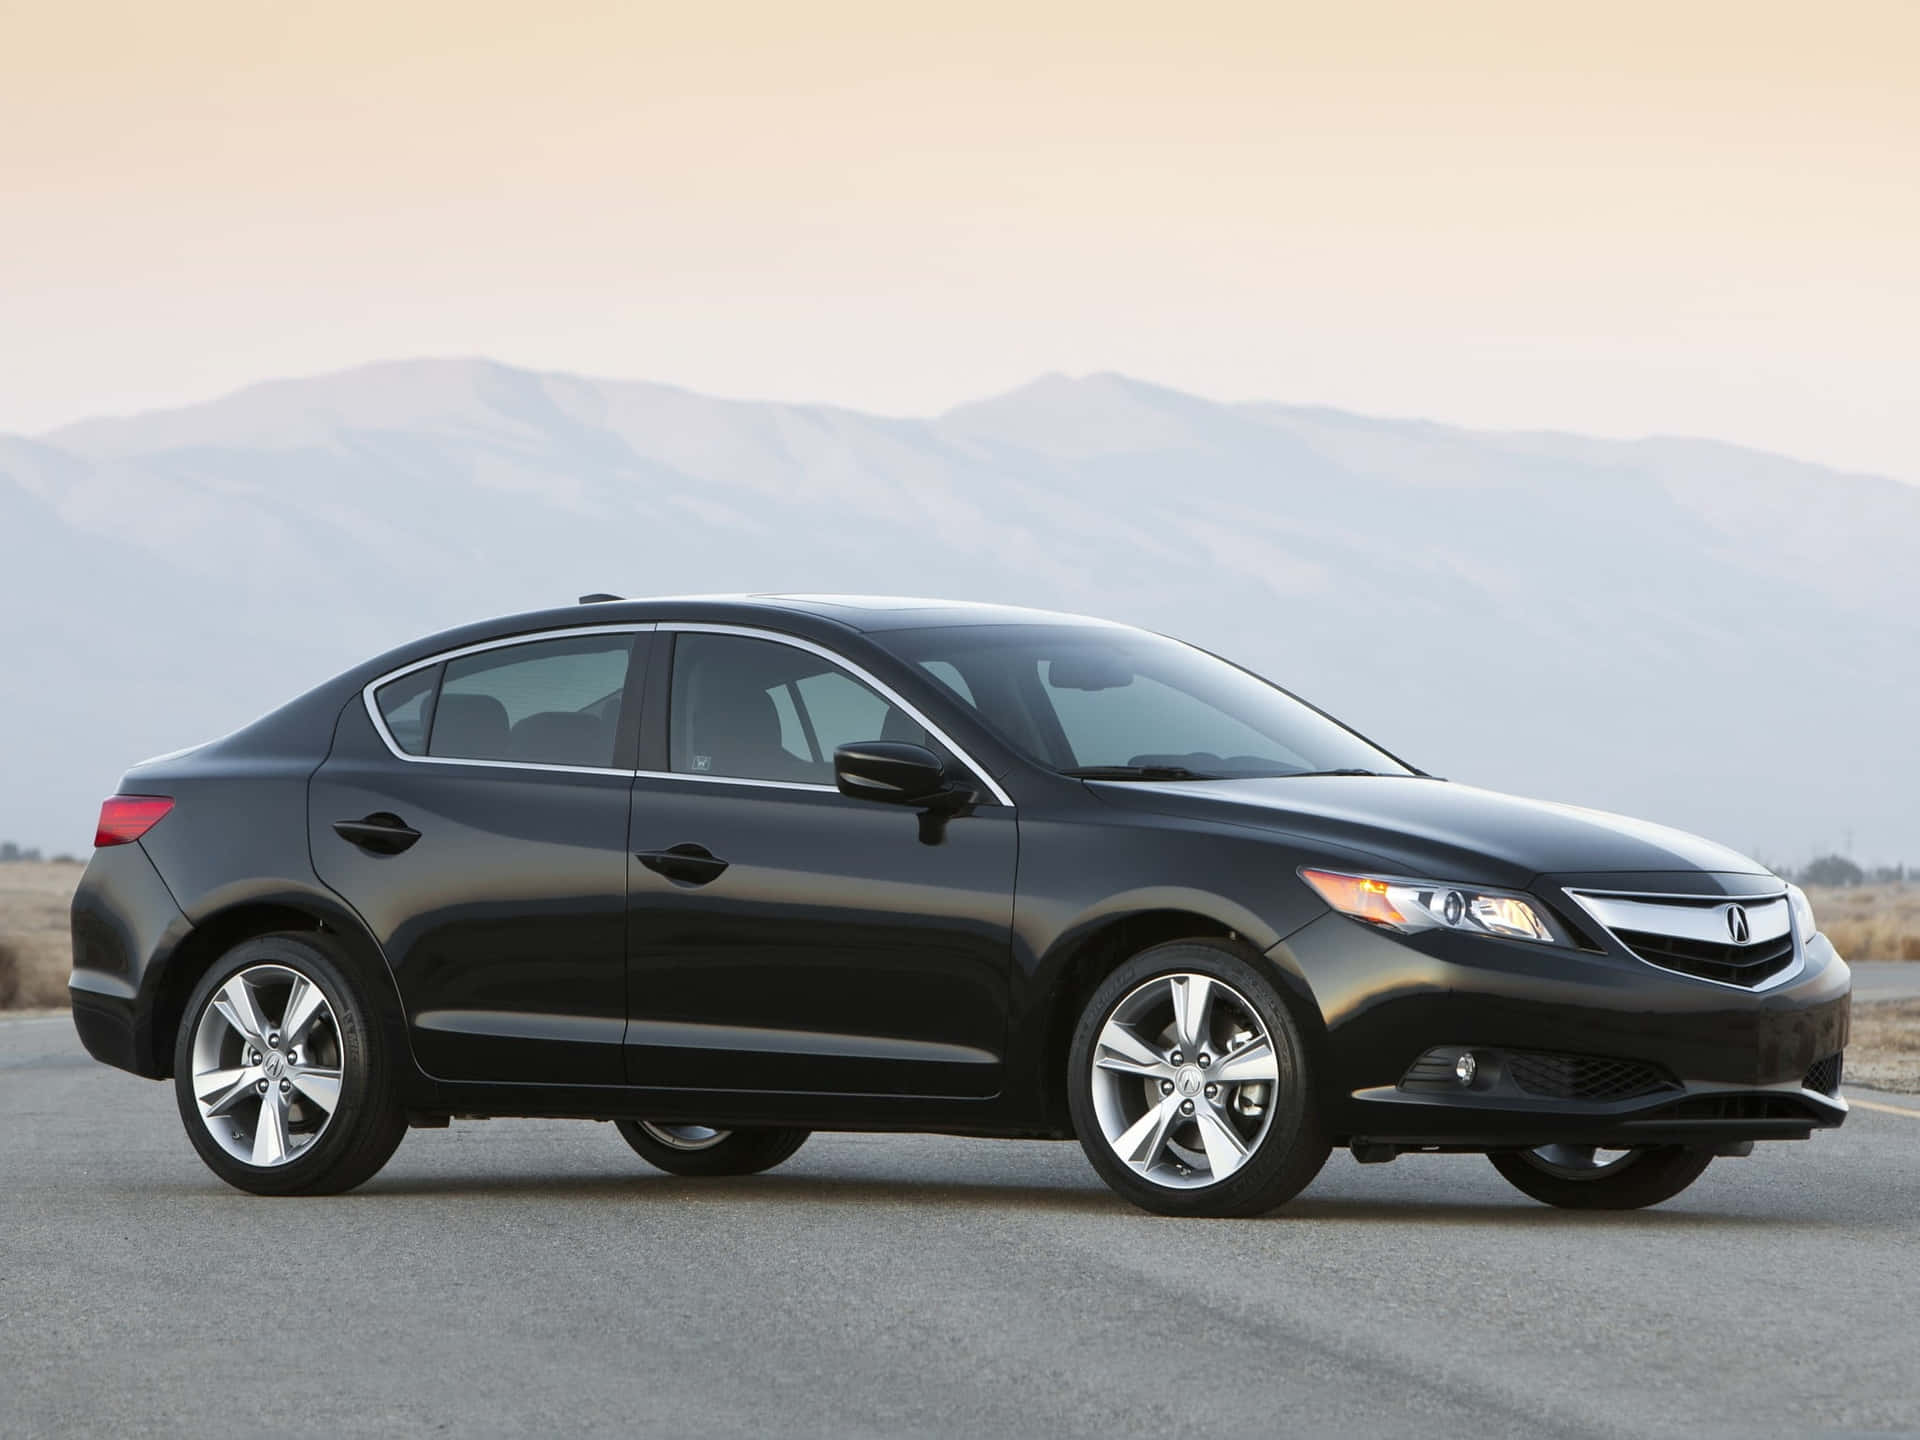 Sleek and Stylish Acura ILX on the Road Wallpaper